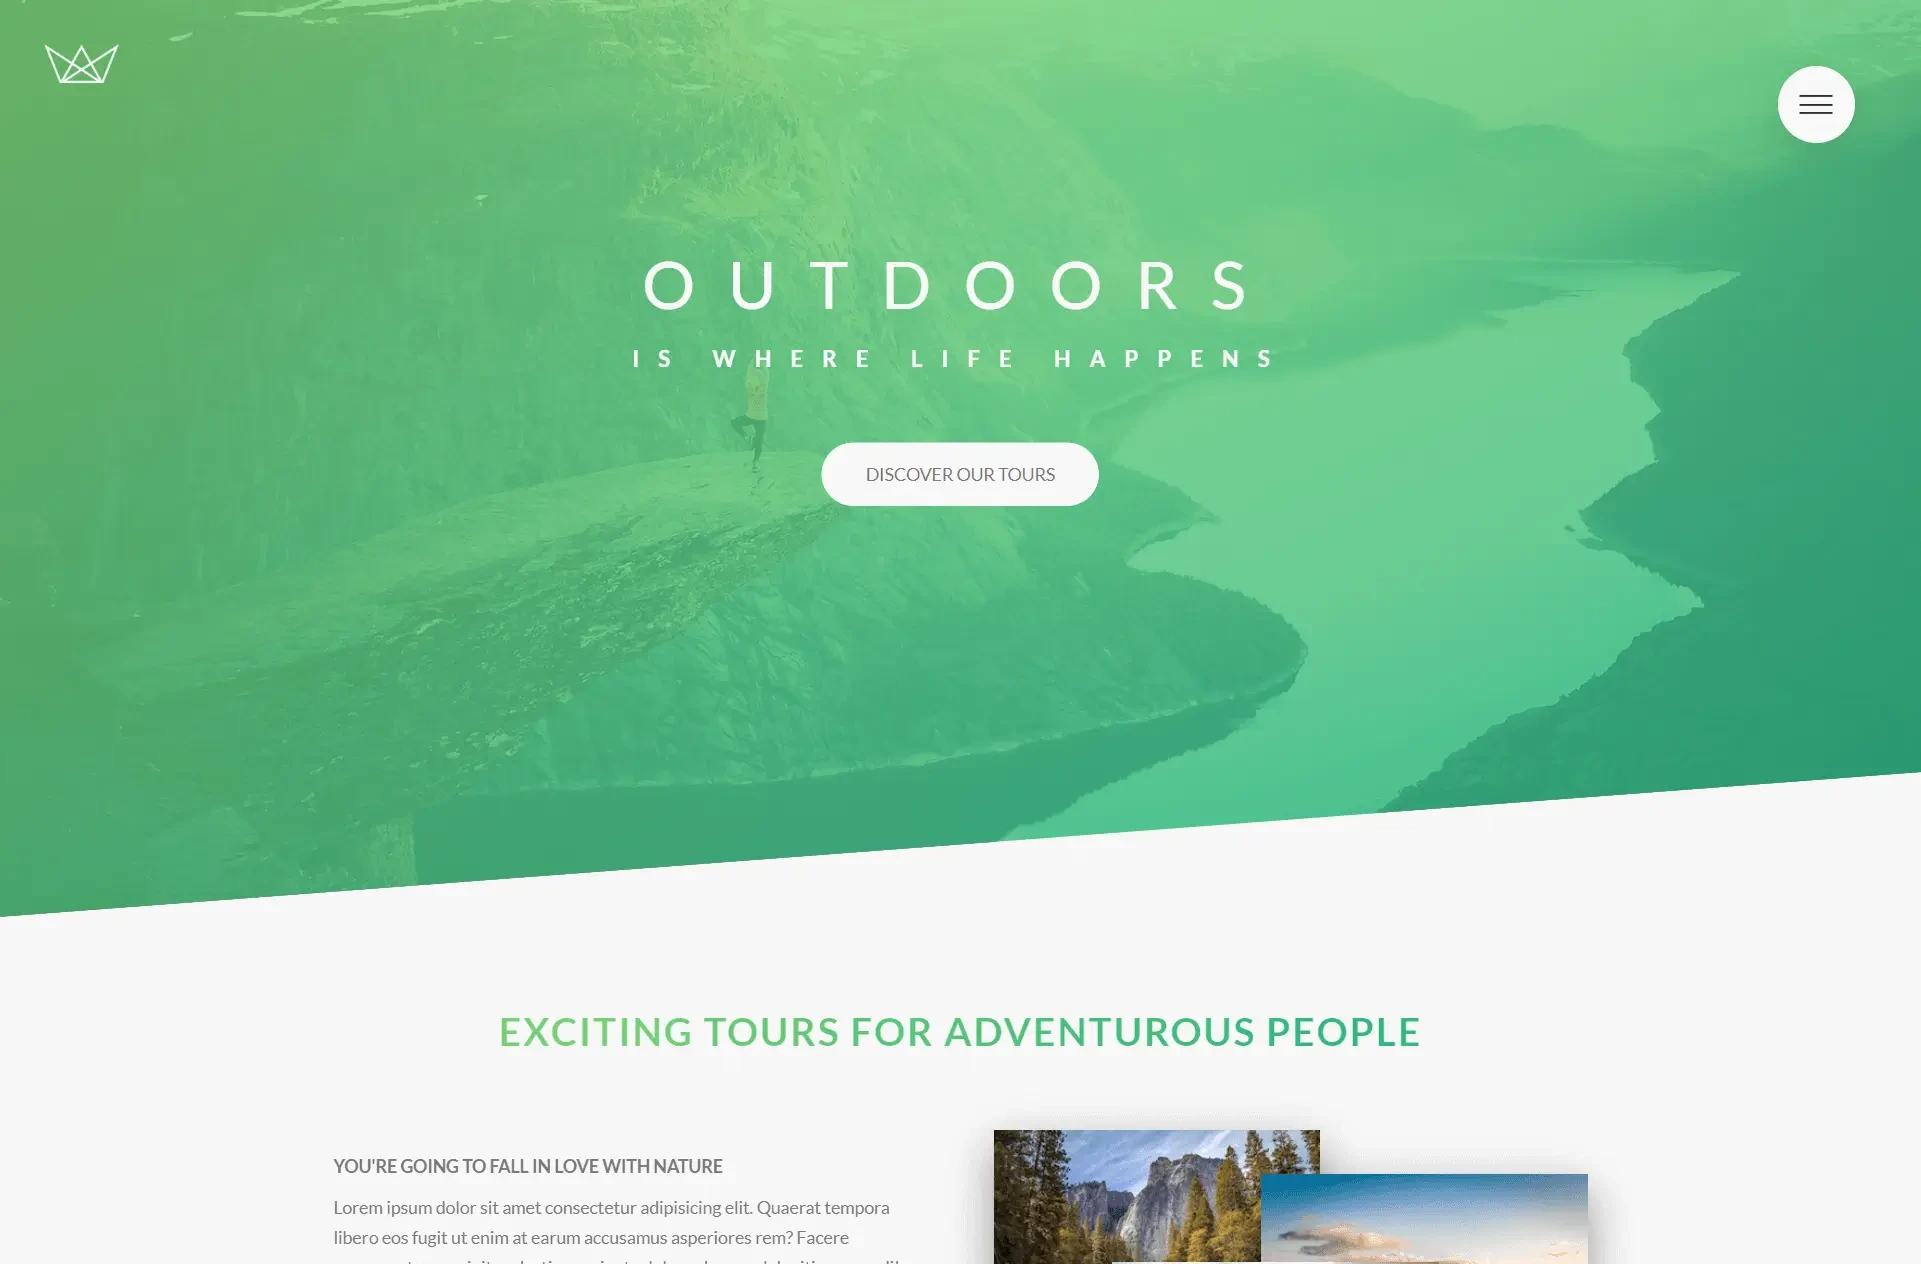 A mostly green/white website that invites you to take tours into nature